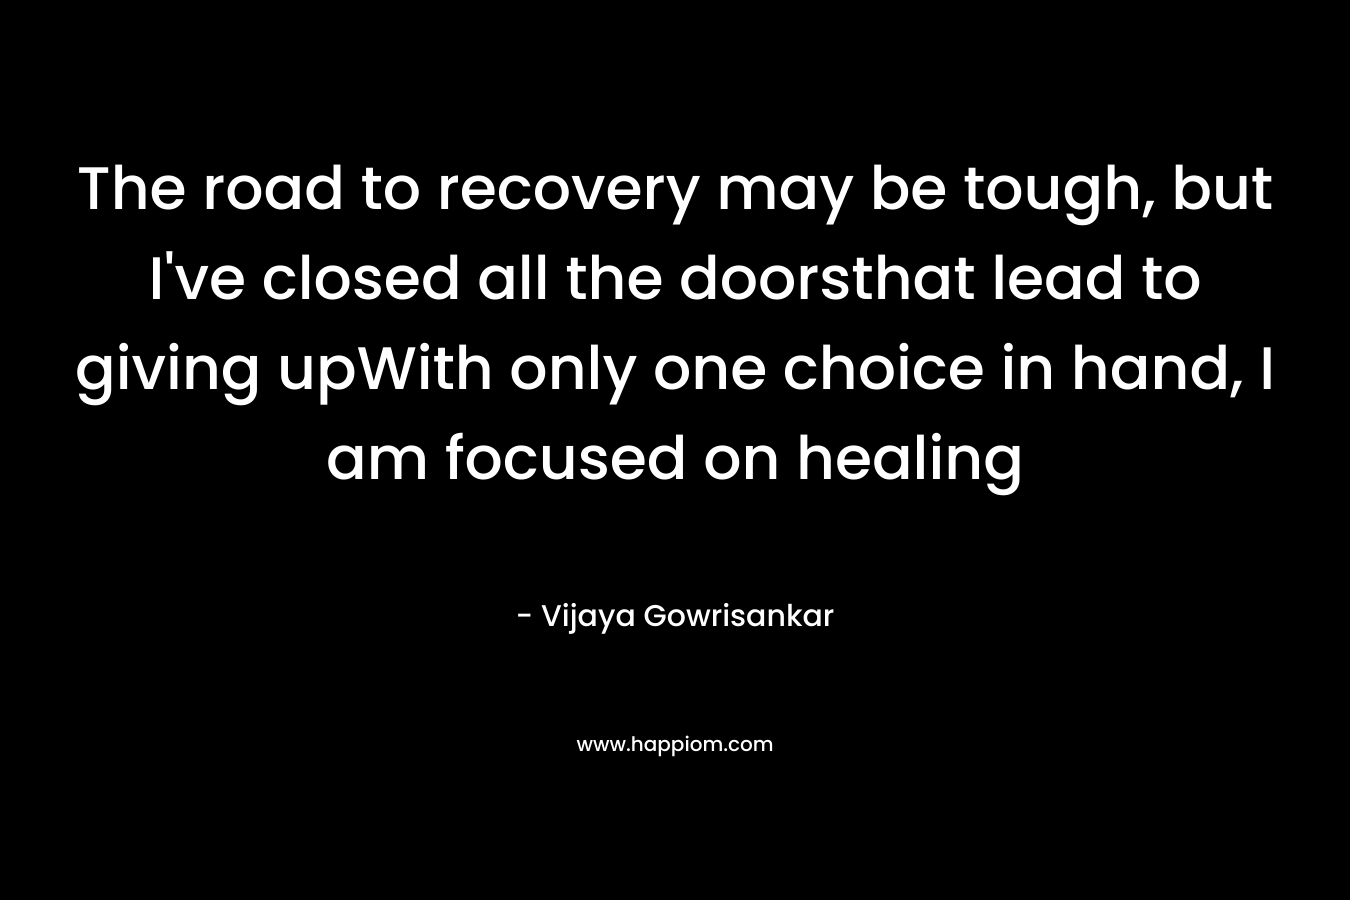 The road to recovery may be tough, but I’ve closed all the doorsthat lead to giving upWith only one choice in hand, I am focused on healing – Vijaya Gowrisankar